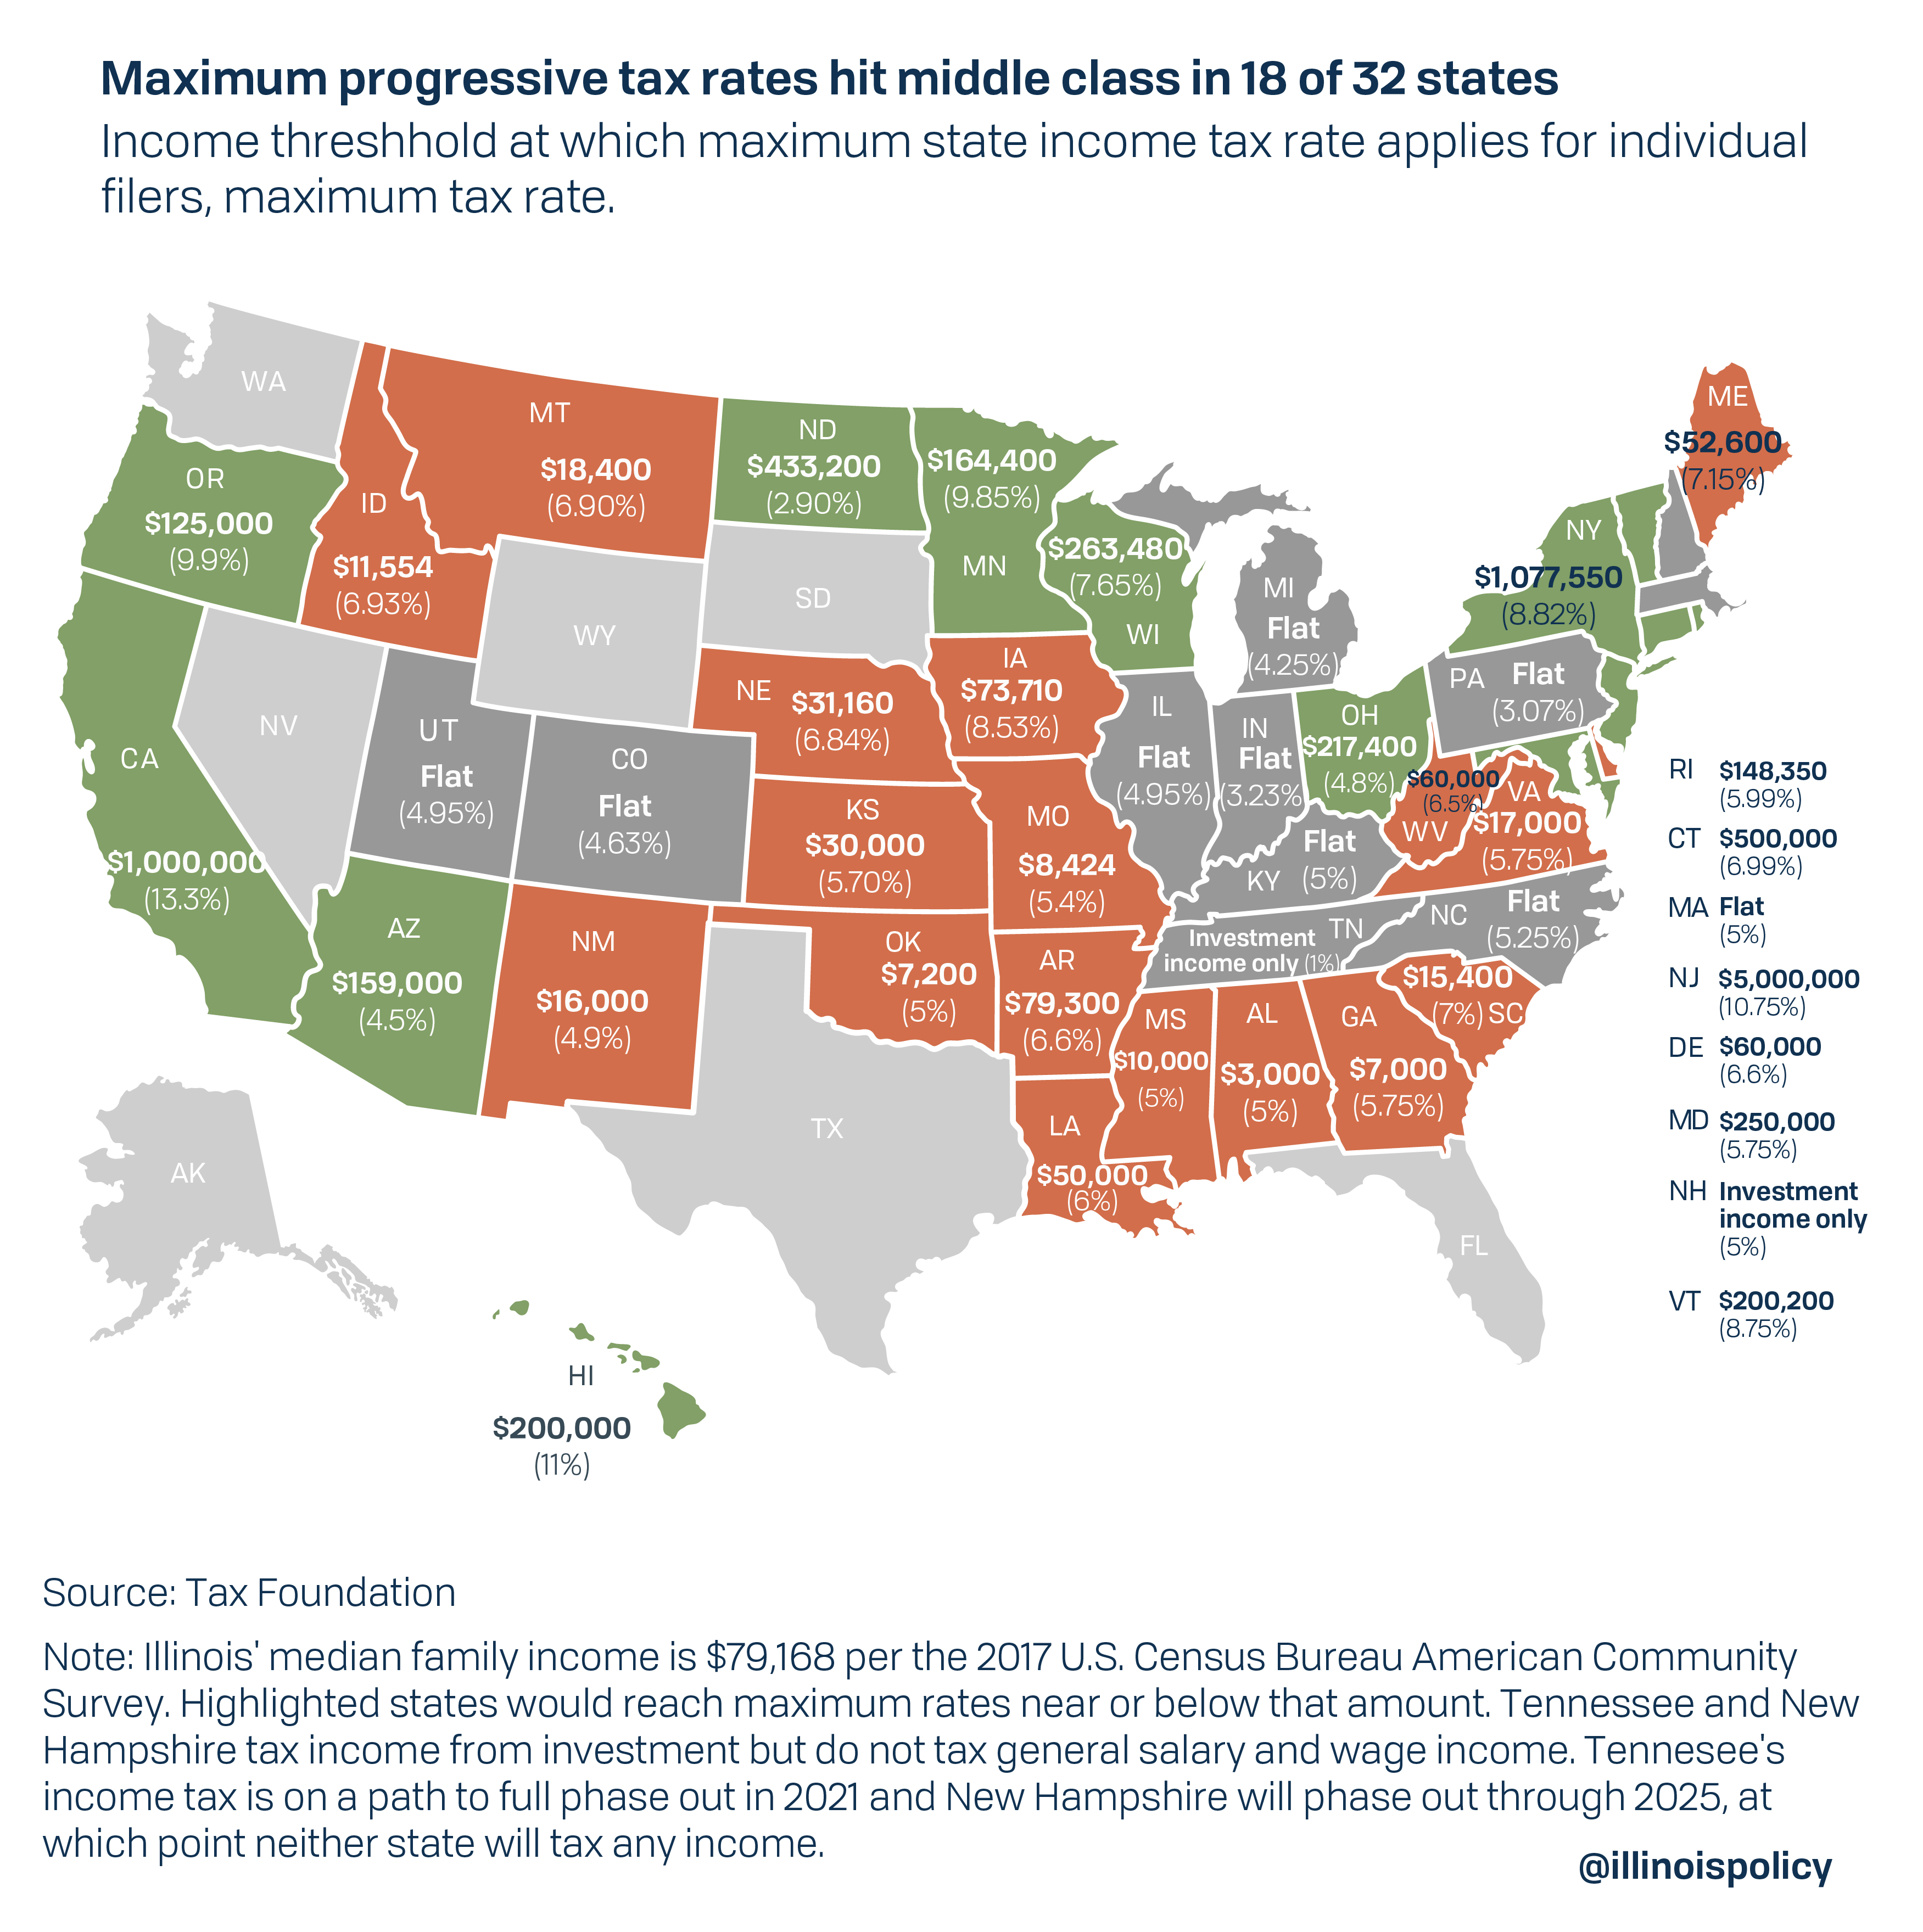 Maximum progressive tax rates hit middle class in 18 of 32 states